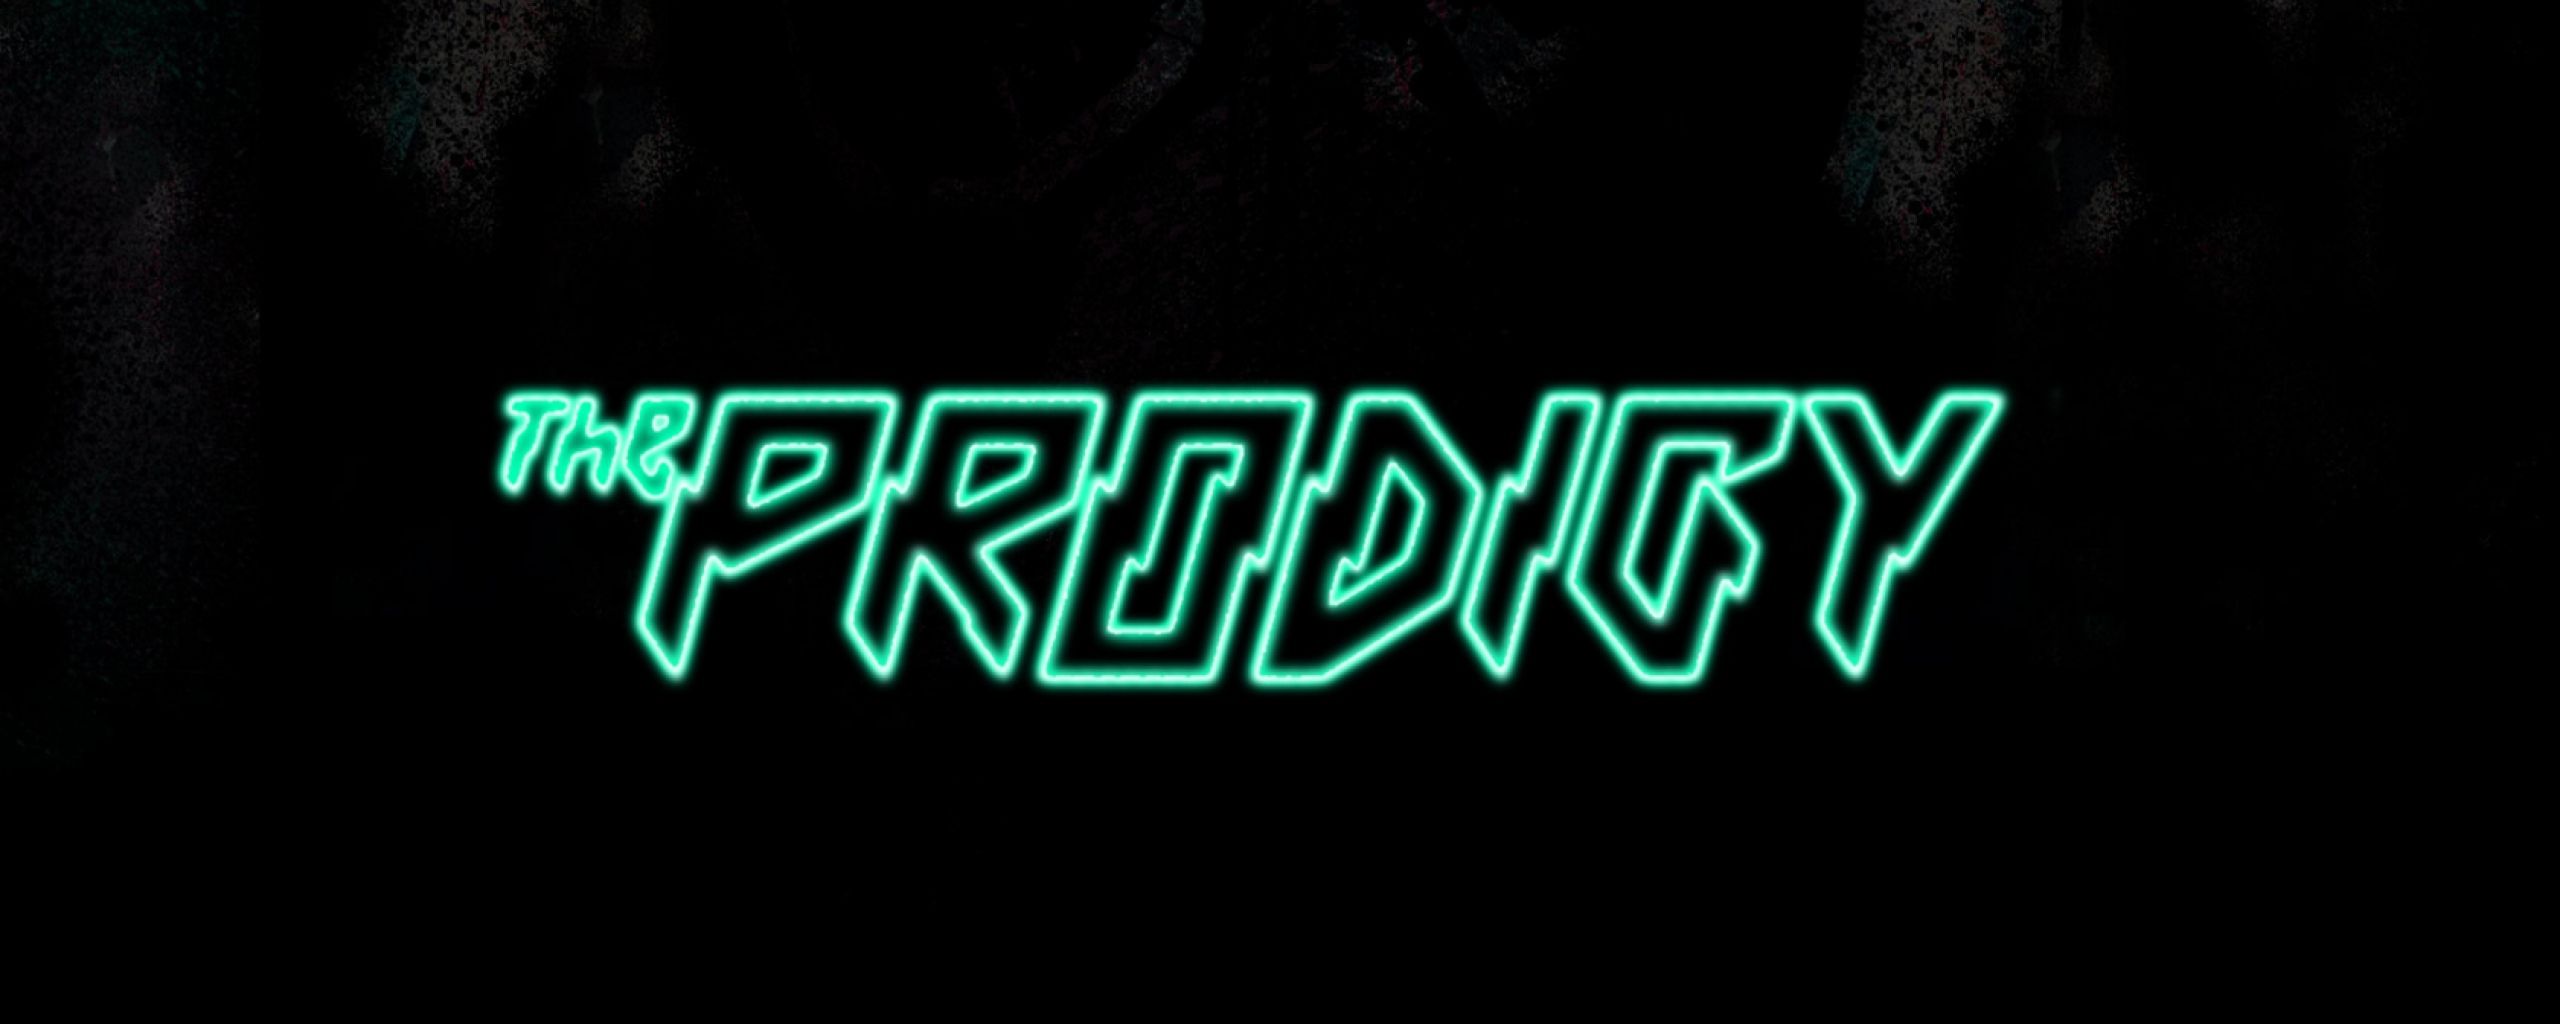 Download Wallpaper 2560x1024 The prodigy, Name, Font, Background ...